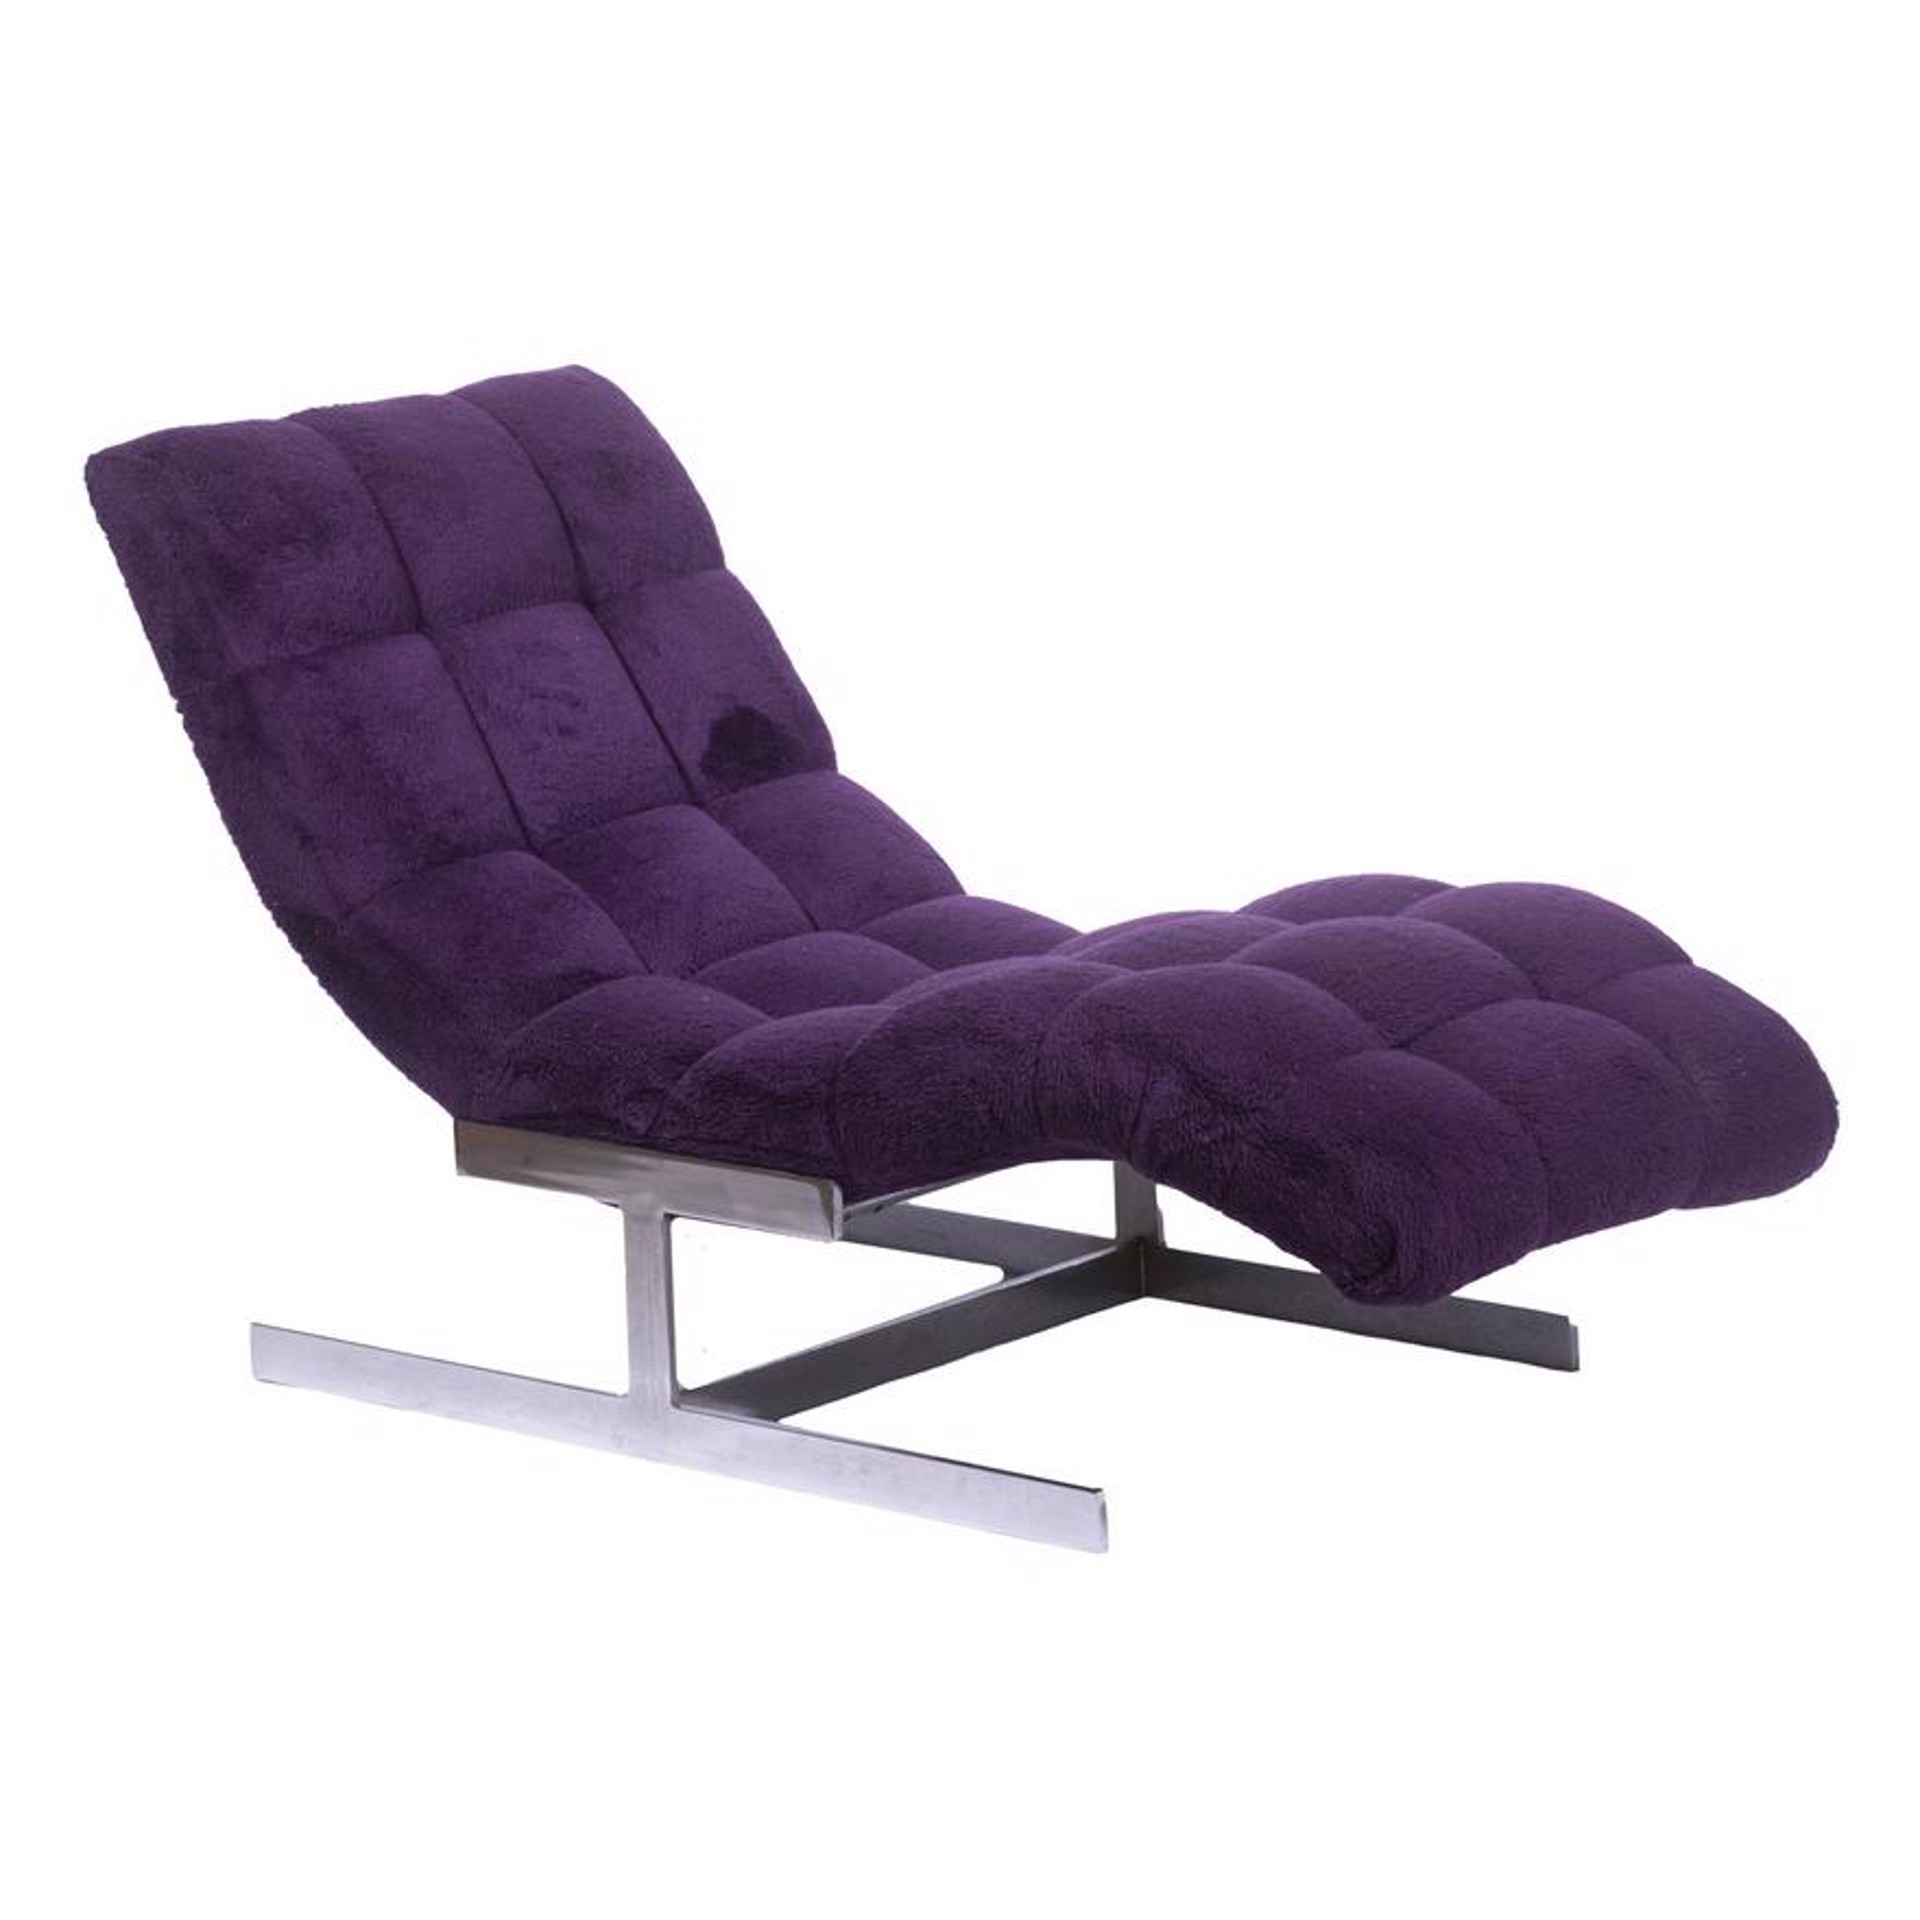 Wave Chaise Lounge by Milo Baughman